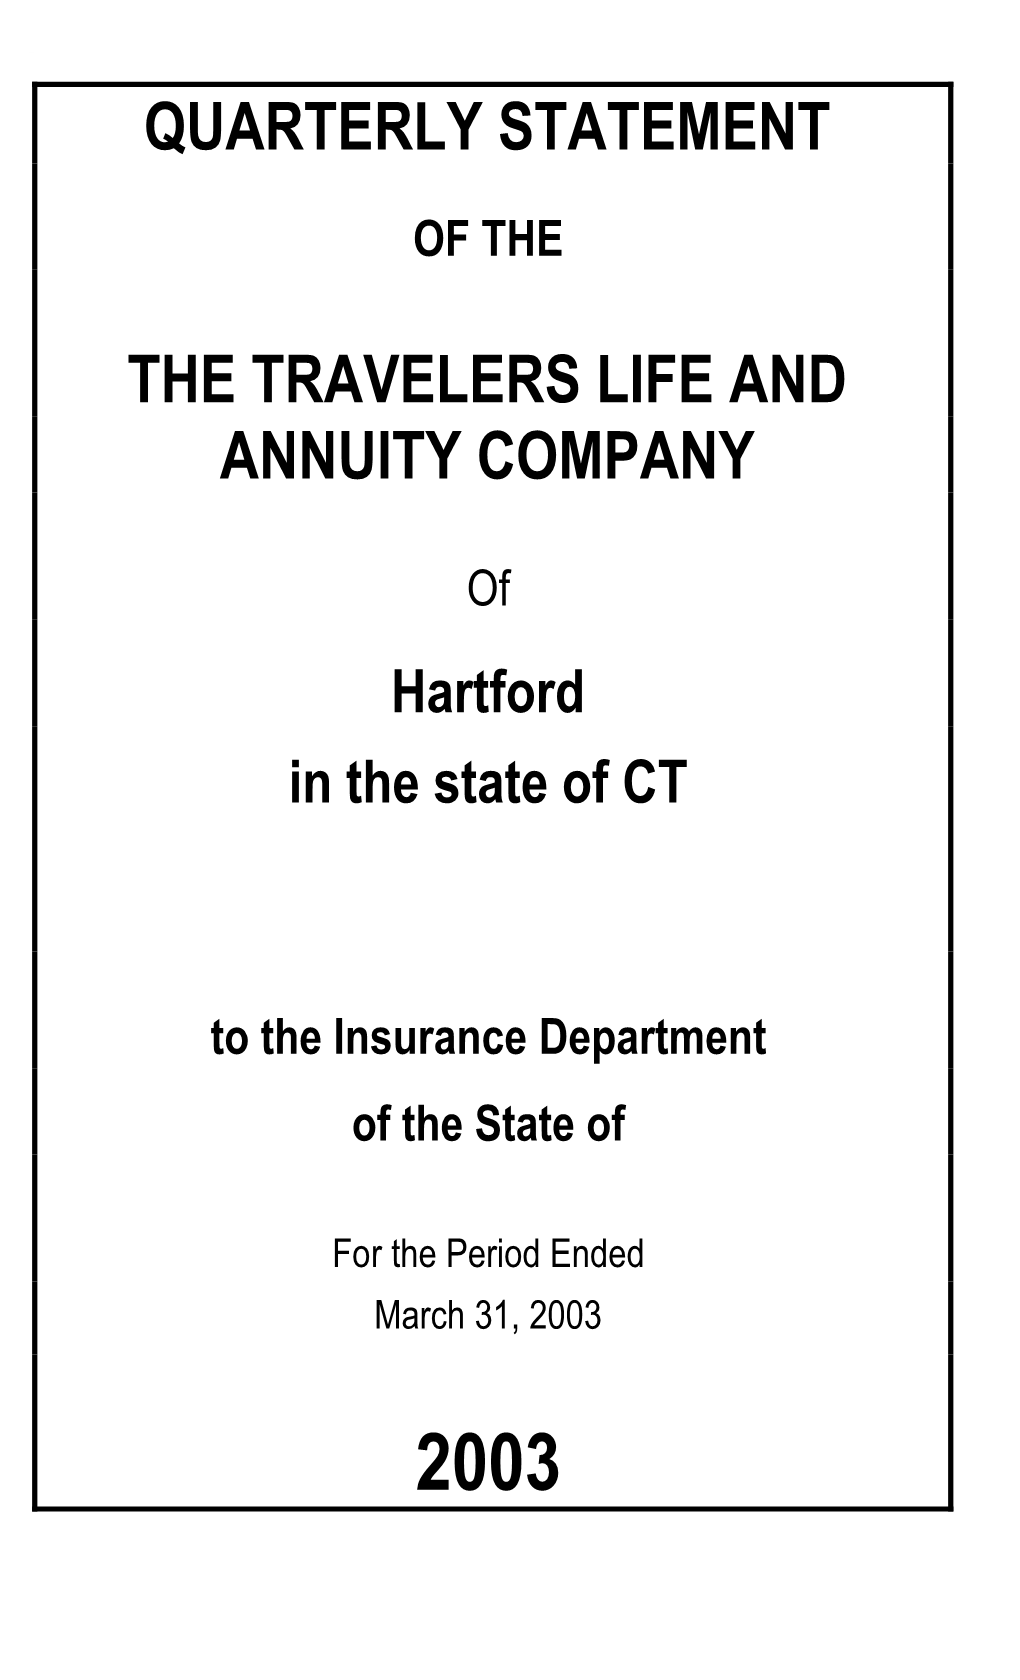 Quarterly Statement the Travelers Life and Annuity Company